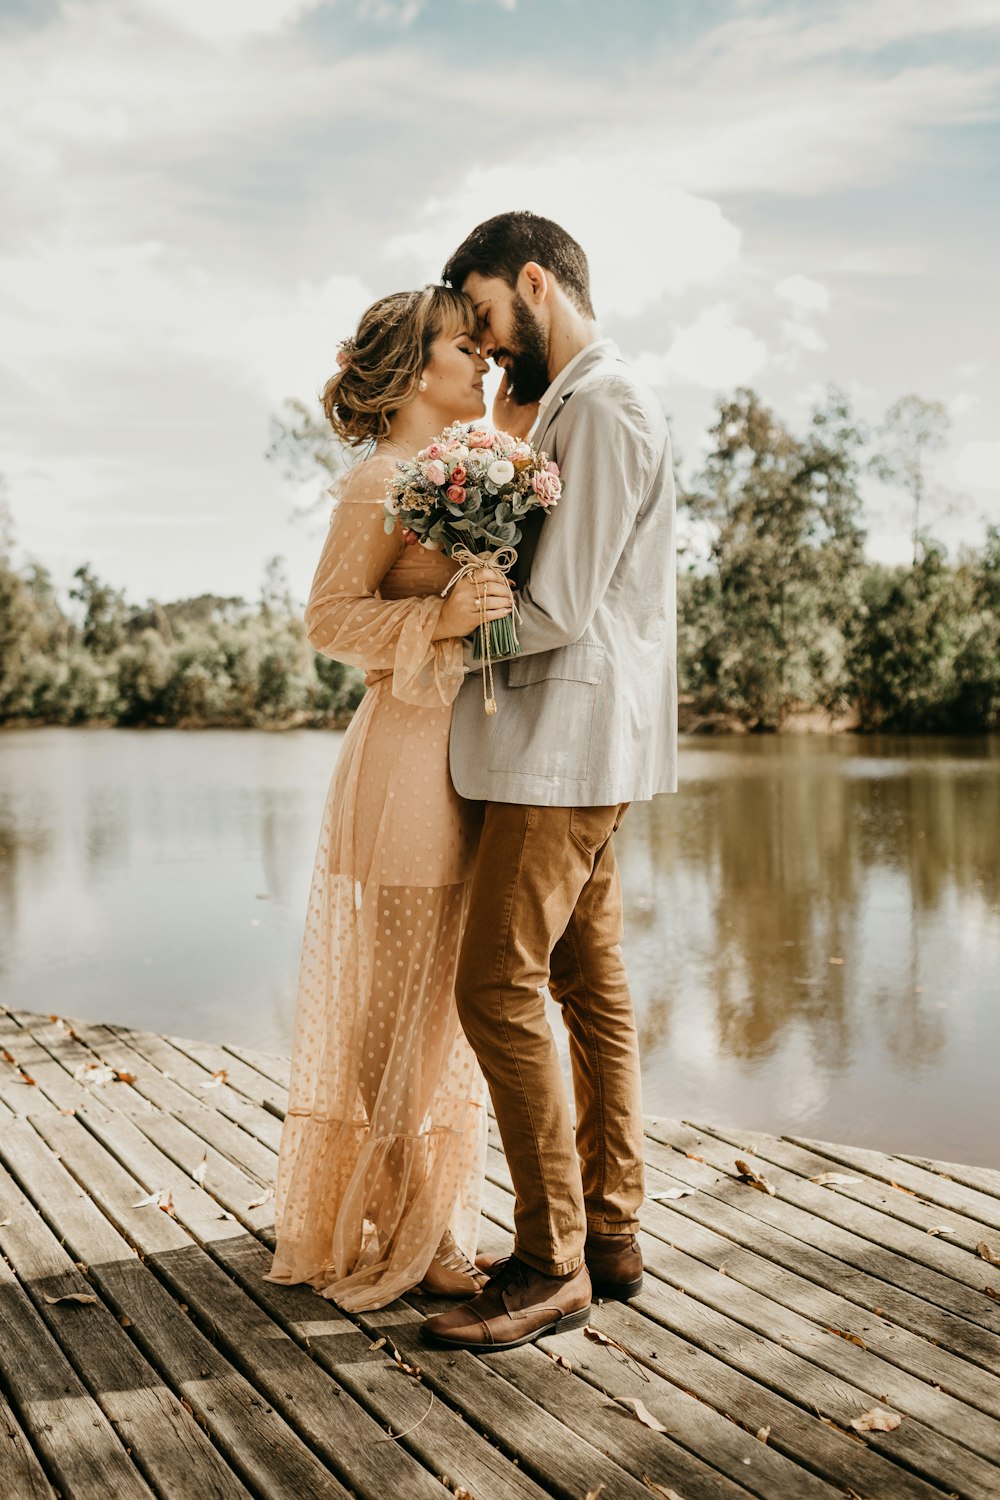 750+ Husband And Wife Pictures | Download Free Images on Unsplash